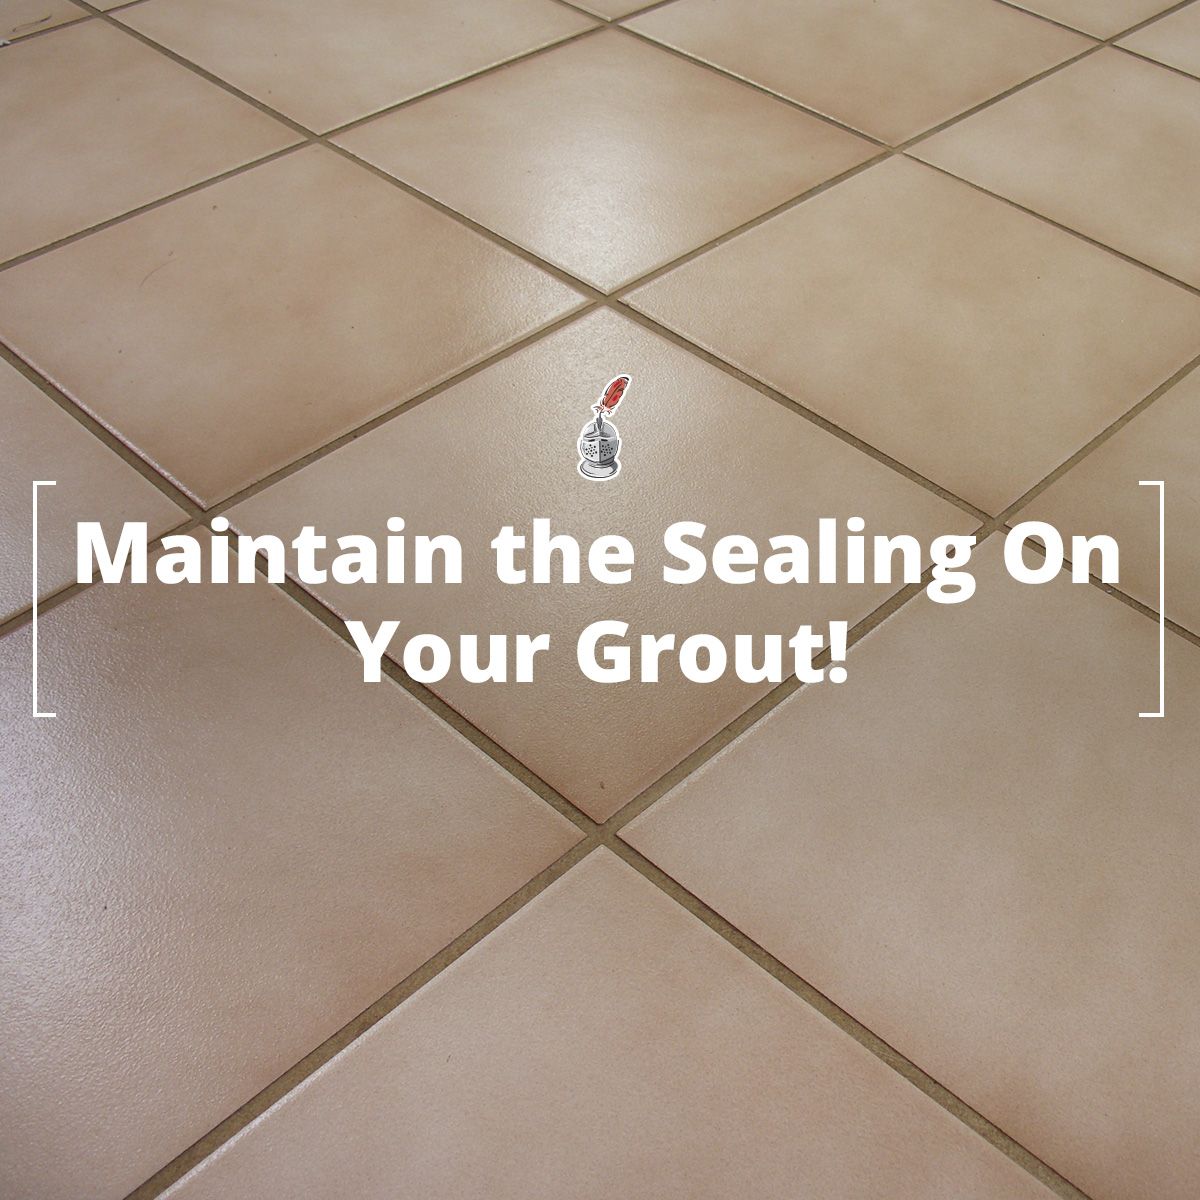 Maintain the Sealing On Your Grout!